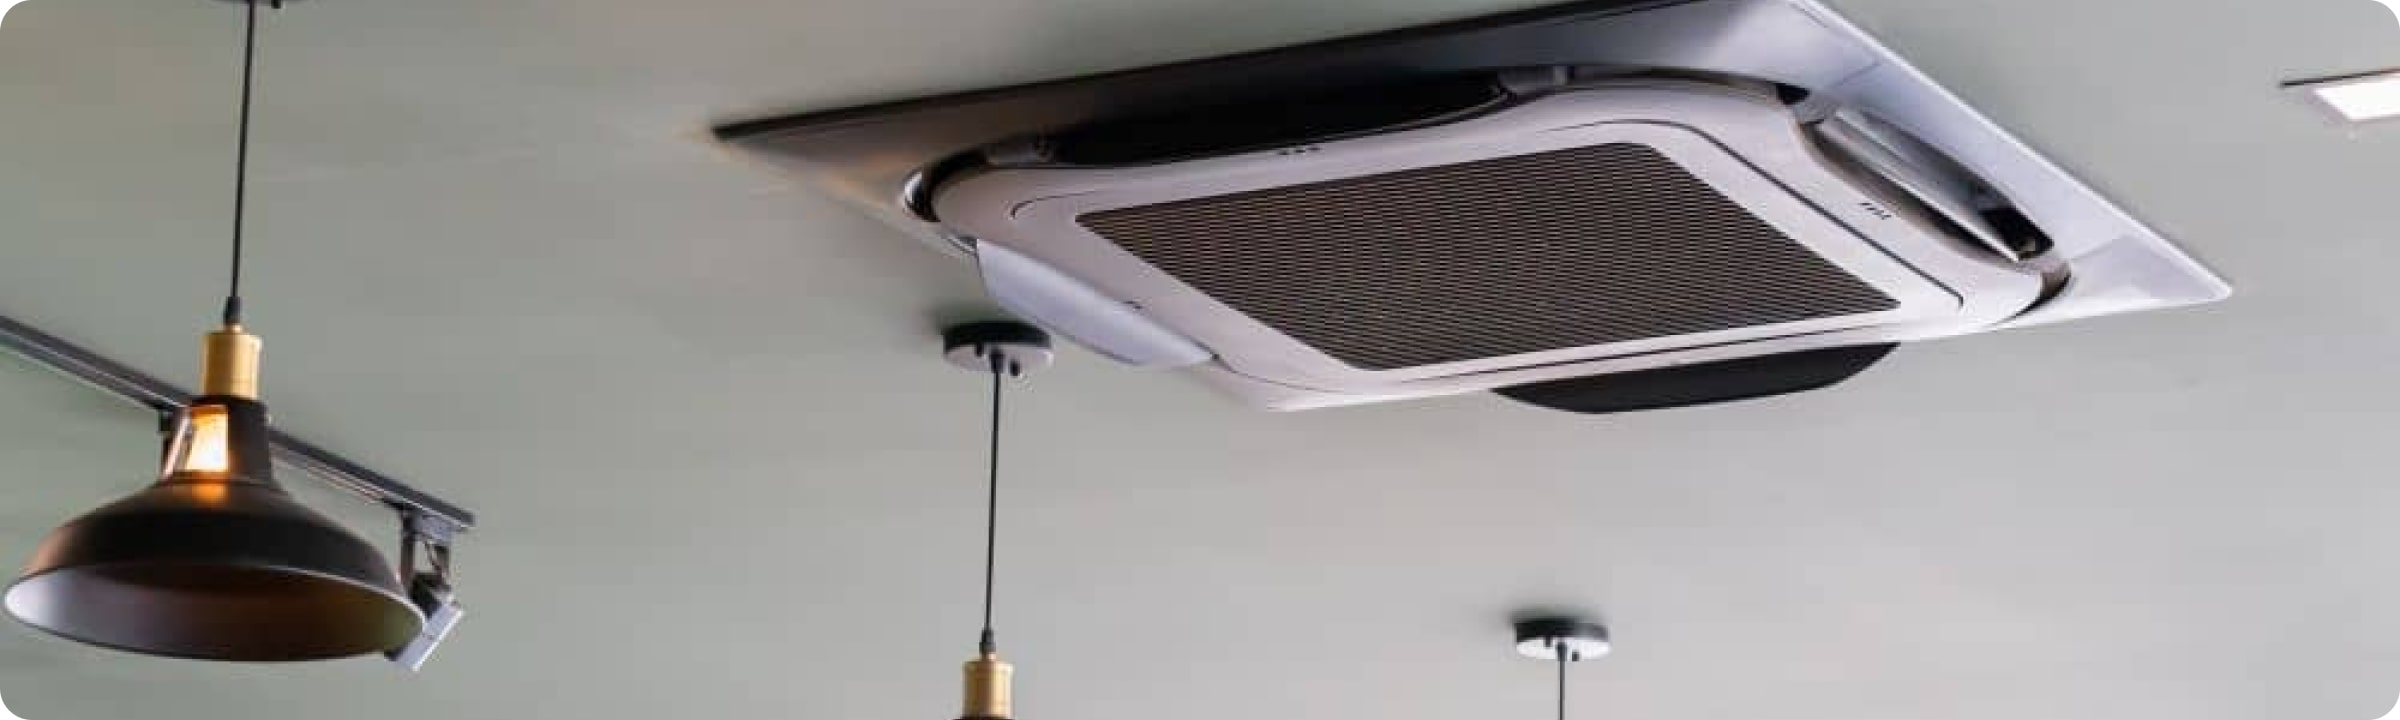 How to install wall mounted Air Conditioner